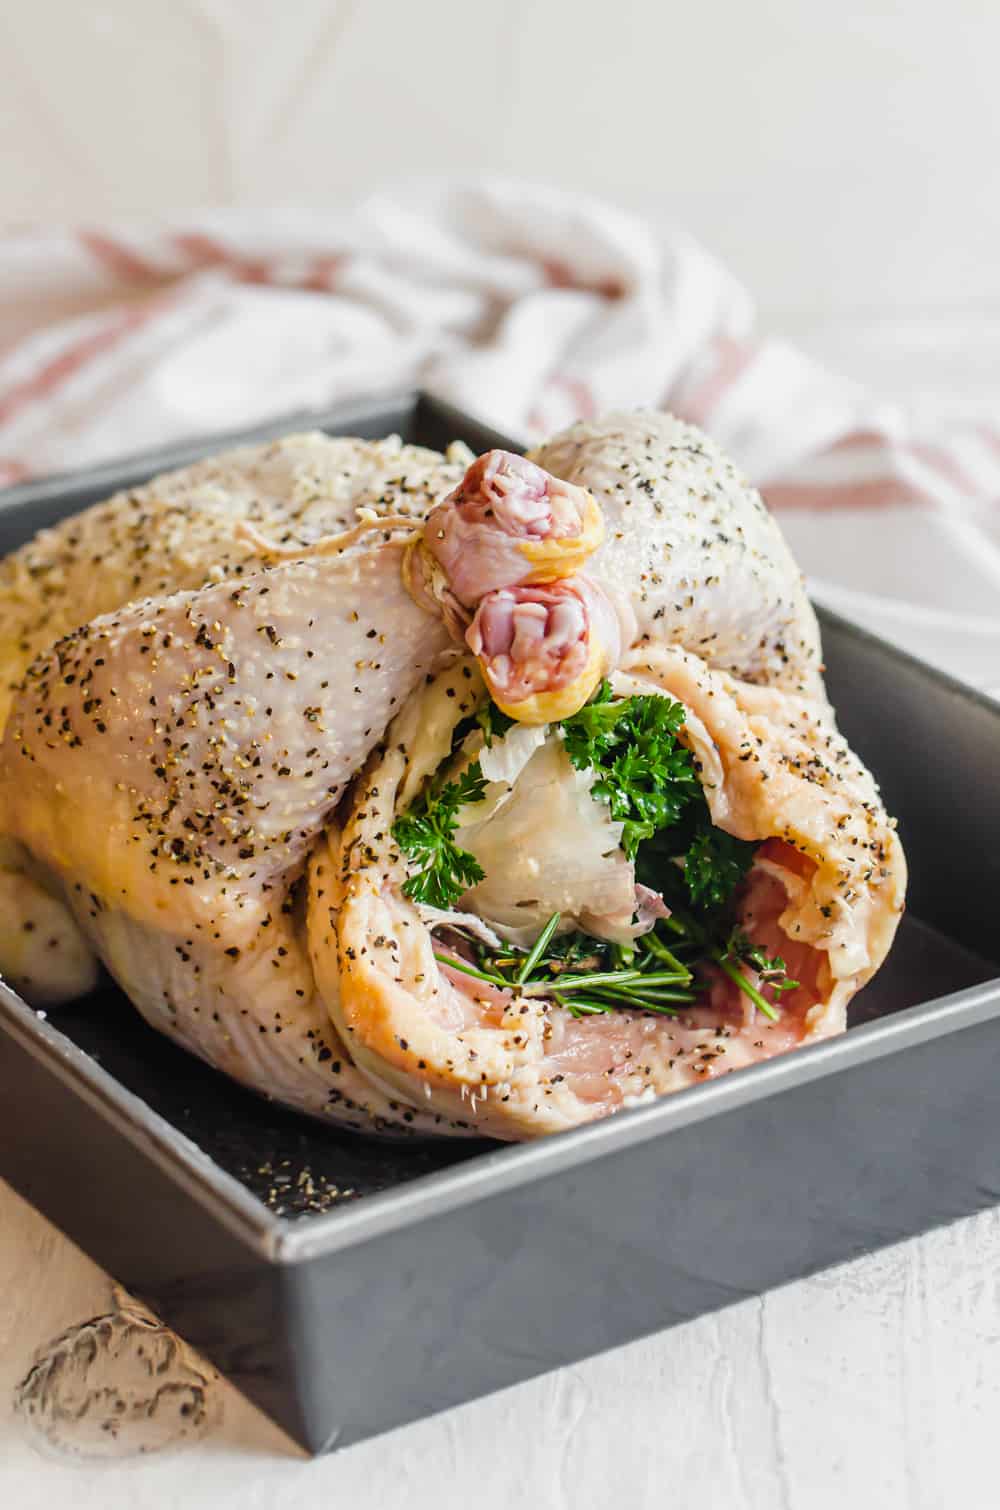 Raw, seasoned whole chicken stuffed with herbs and vegetables in a baking pan.